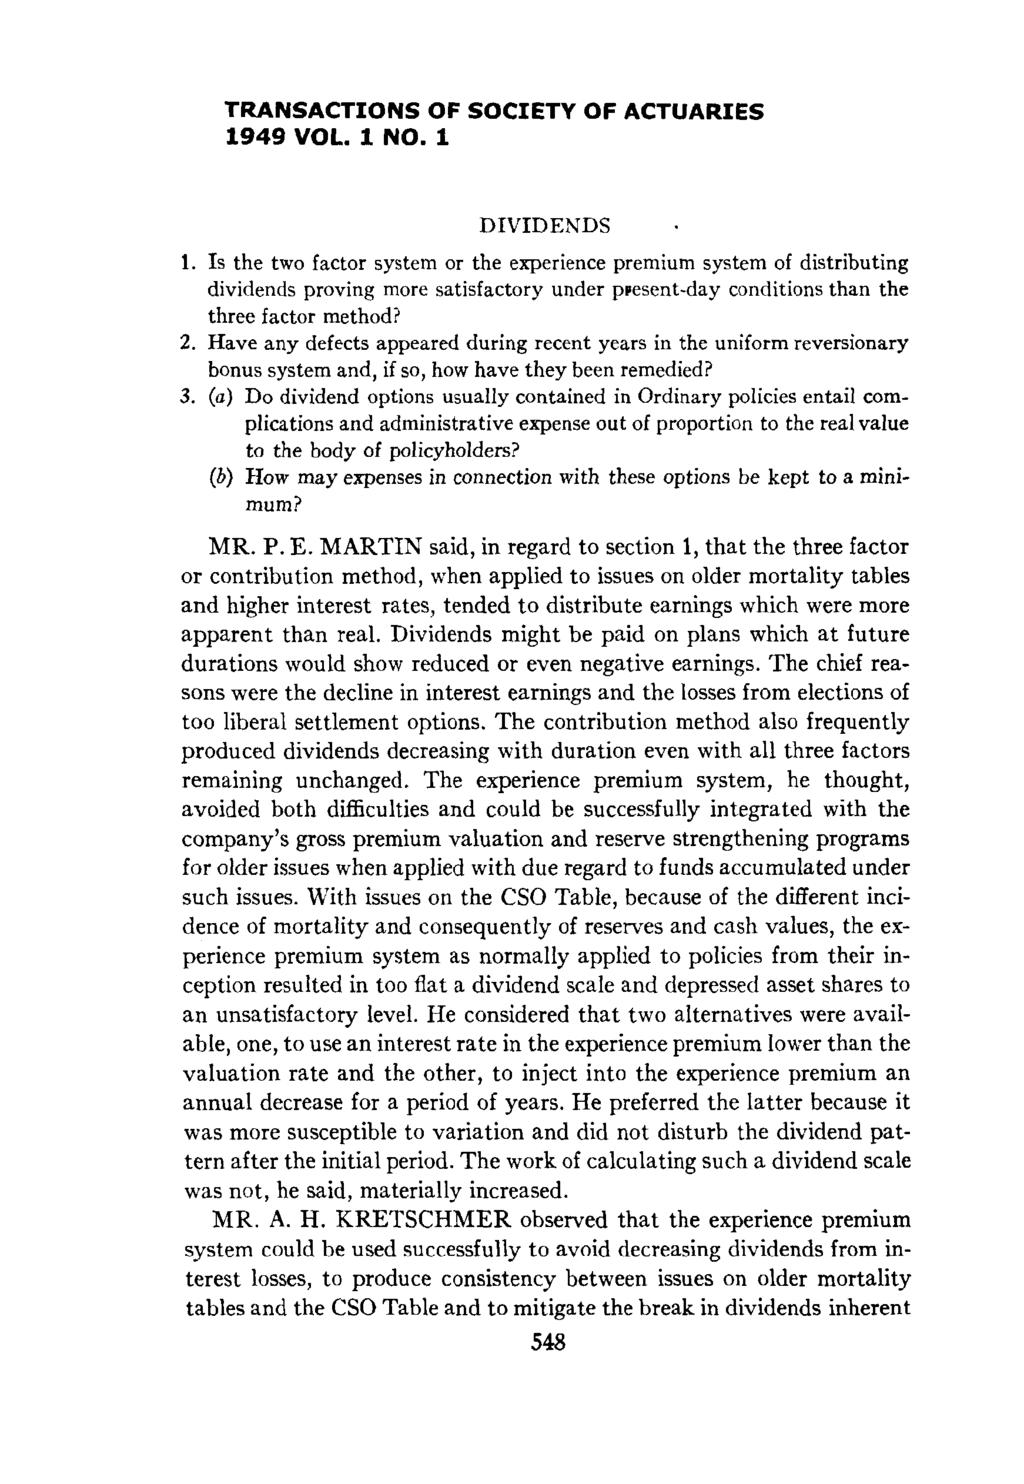 TRANSACTIONS OF SOCIETY OF ACTUARIES 1949 VOL. 1 NO. 1 DIVIDENDS 1.